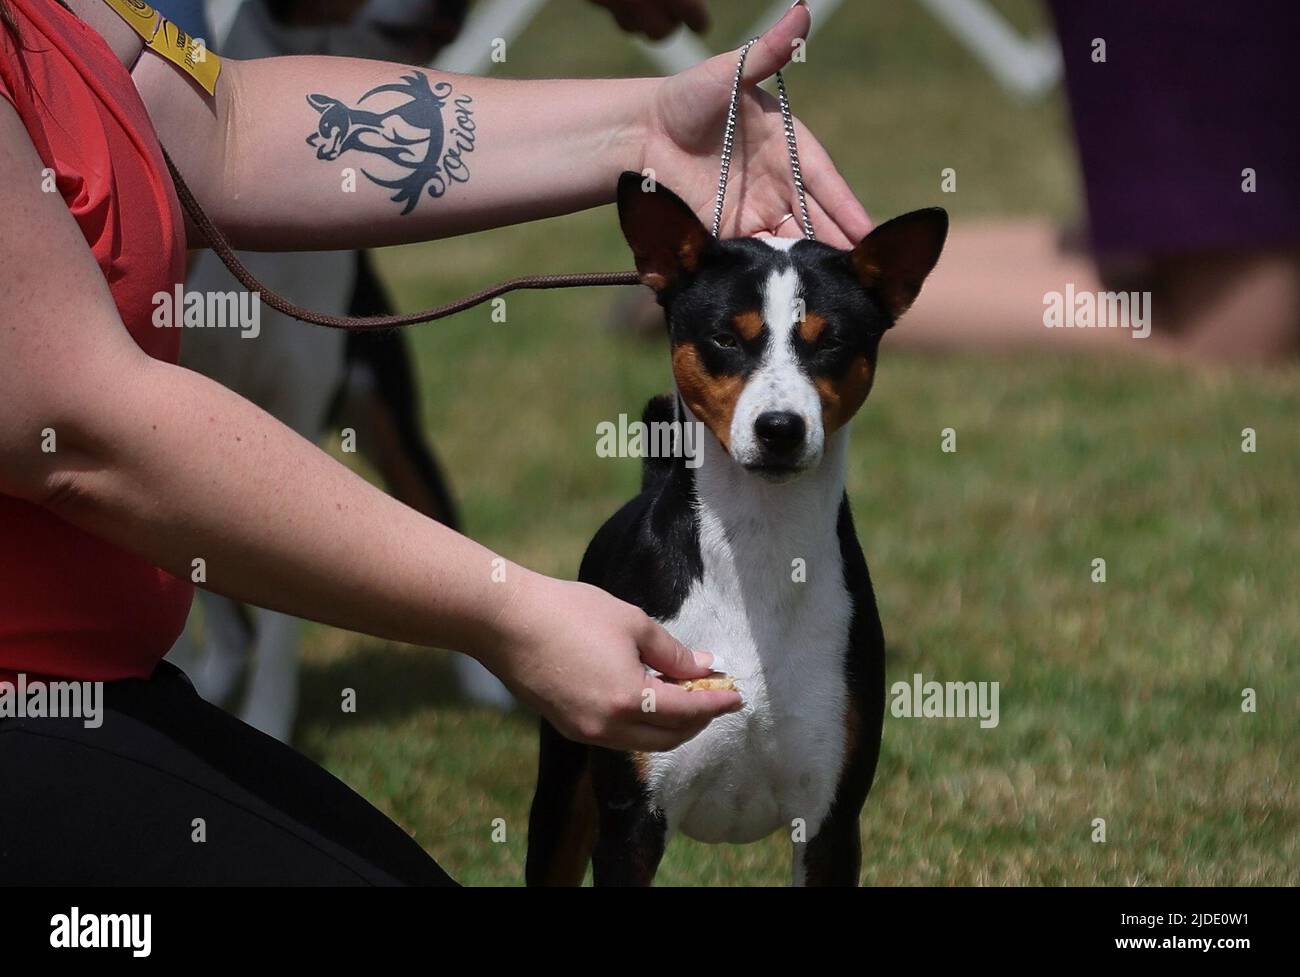 A handler poses a Basenji dog during breed judging at the 146th Westminster Kennel Club Dog Show at the Lyndhurst Estate in Tarrytown, New York, U.S., June 20, 2022. REUTERS/Mike Segar Stock Photo